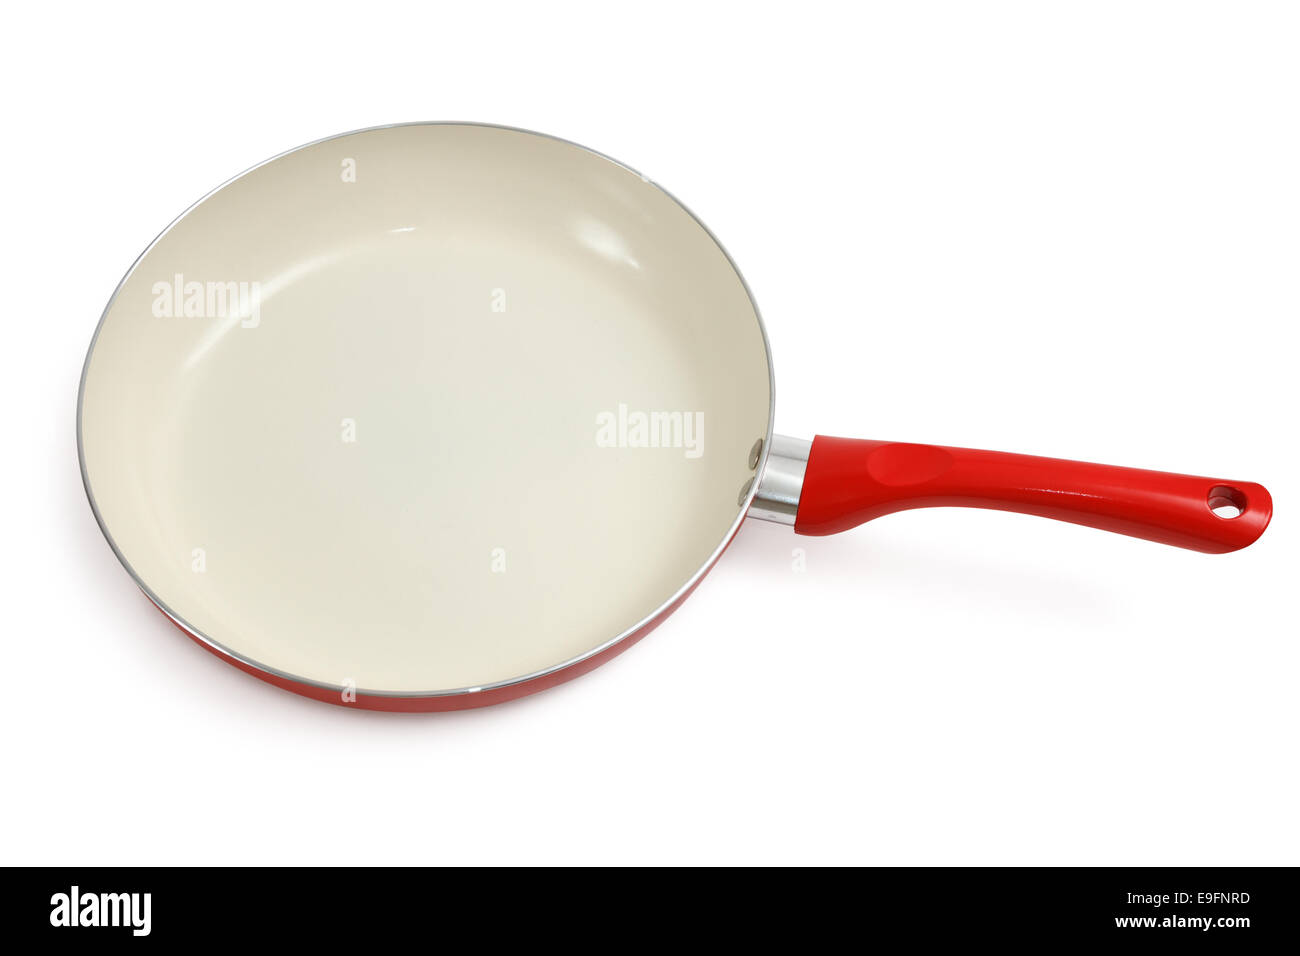 Frying Pan High Resolution Stock Photography and Images - Alamy